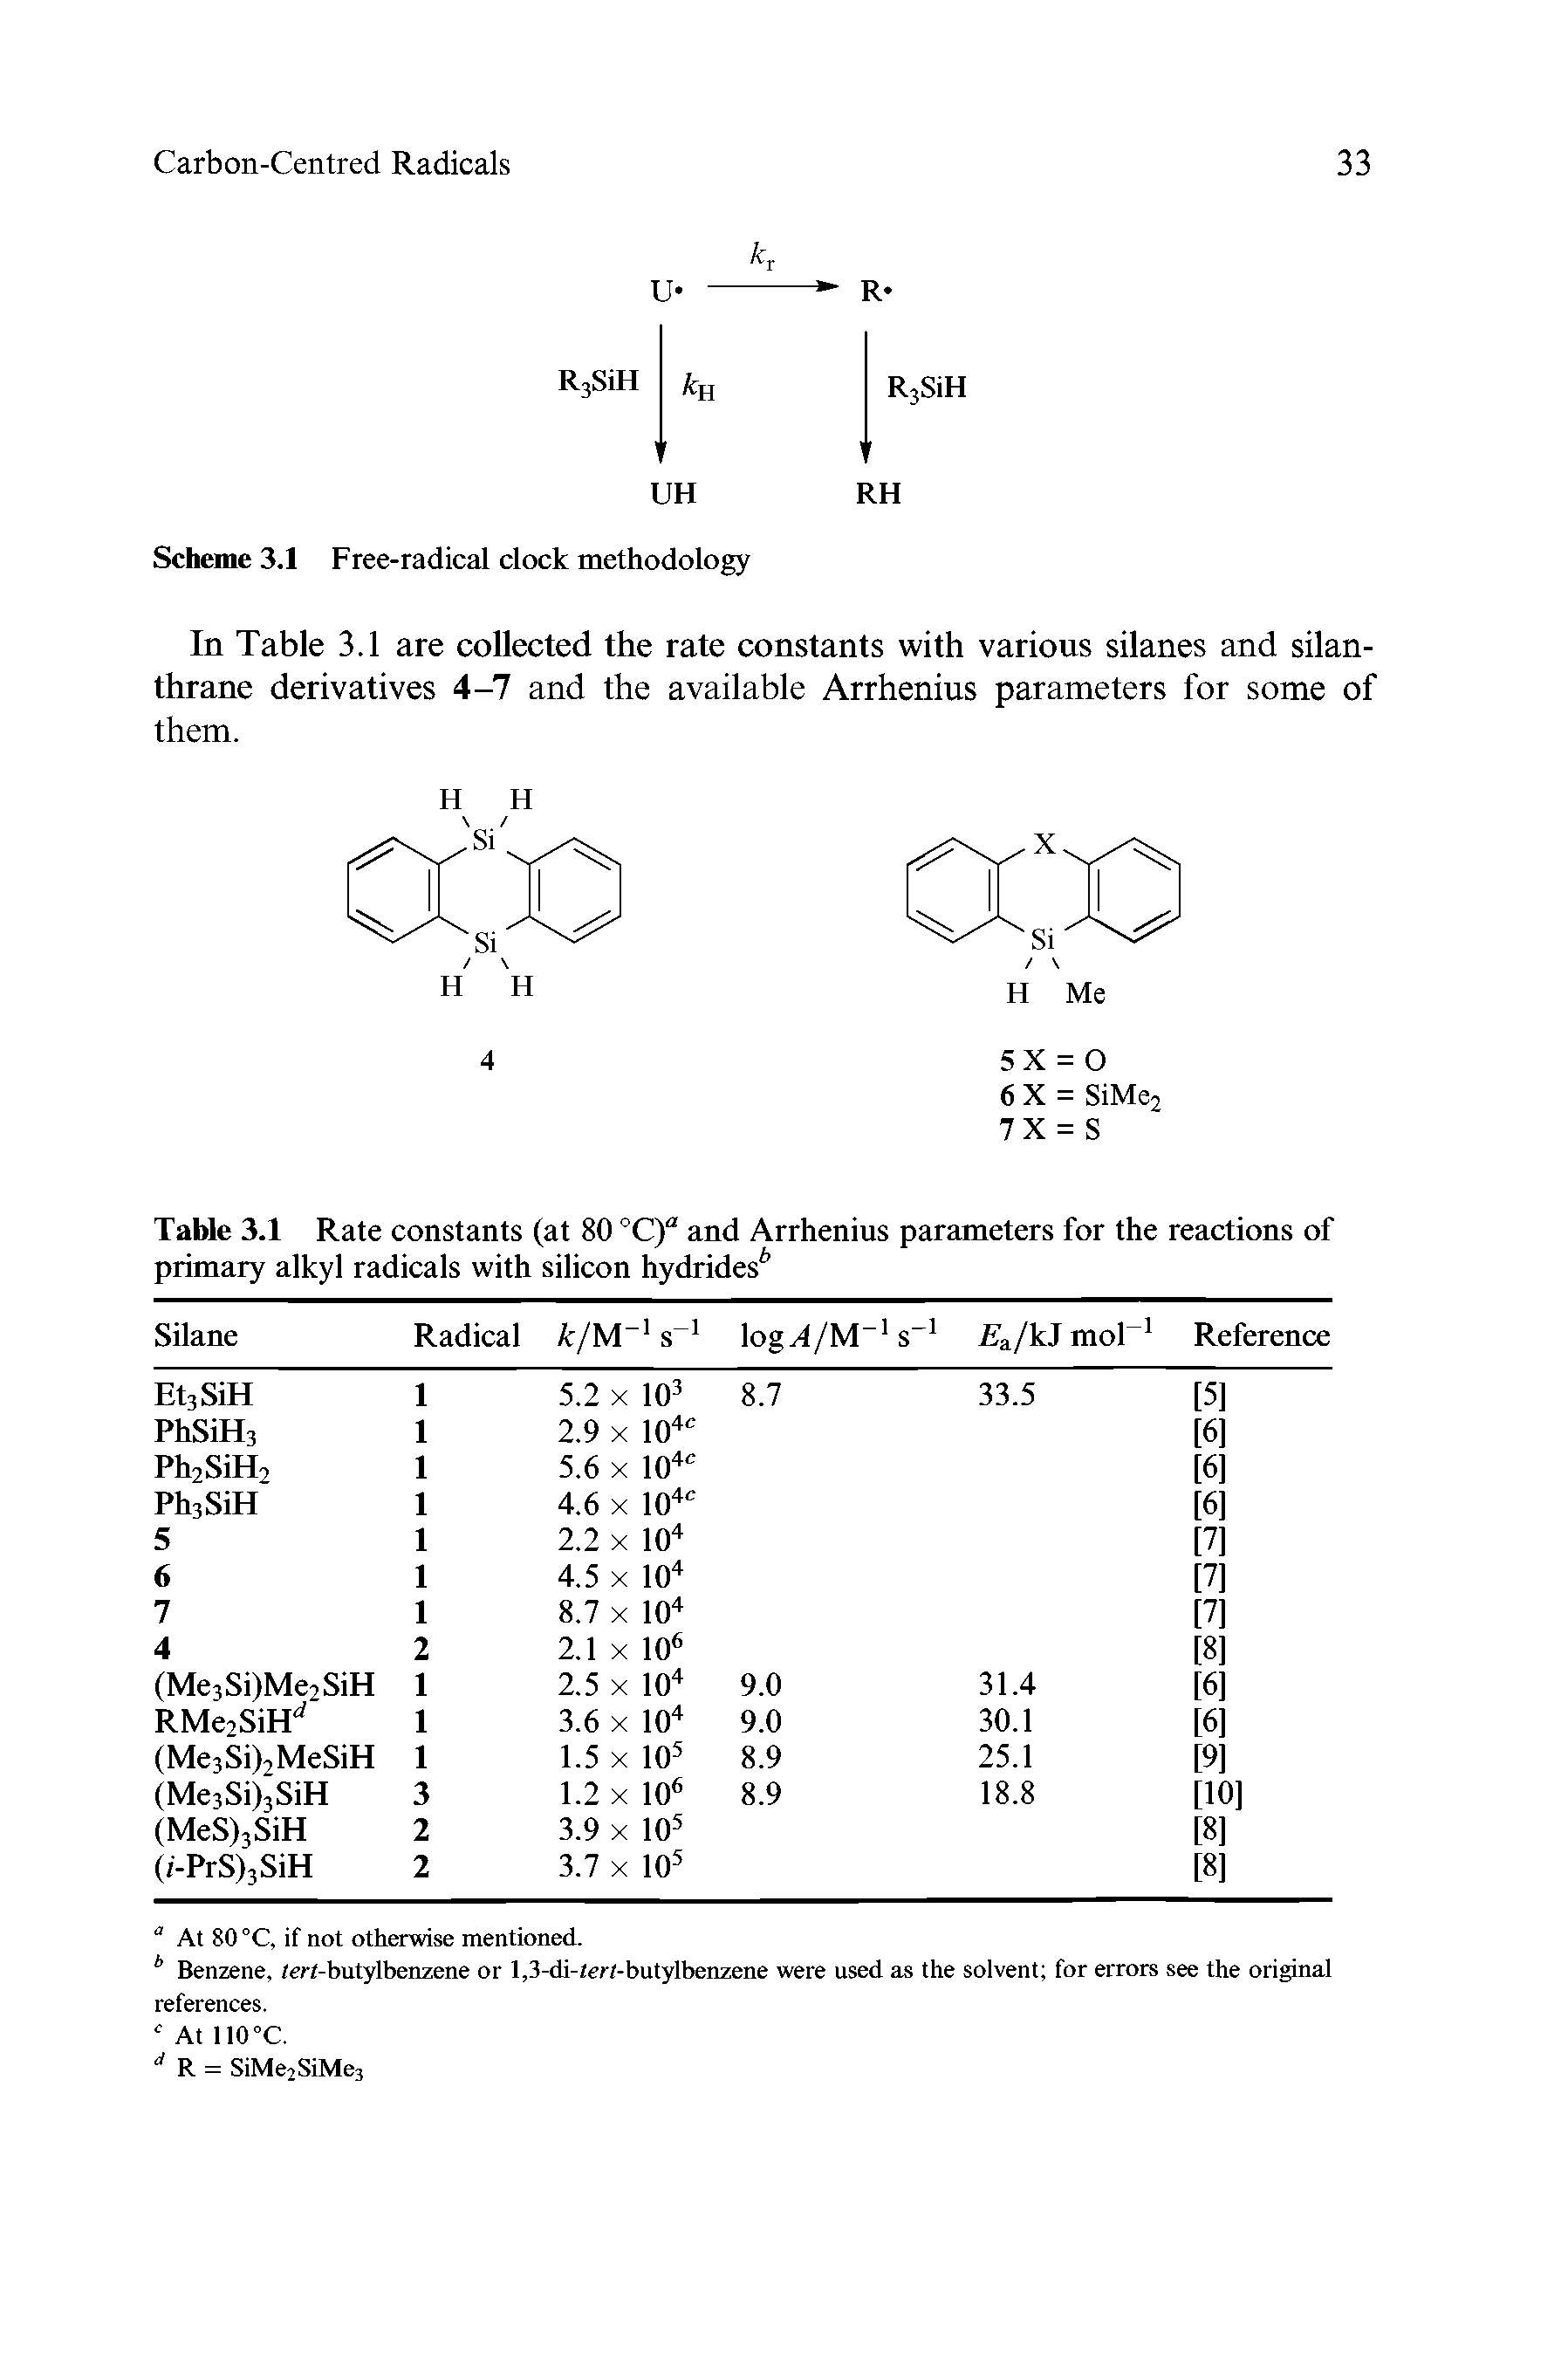 Table 3.1 Rate constants (at 80 °C) and Arrhenius parameters for the reactions of primary alkyl radicals with silicon hydrides ...